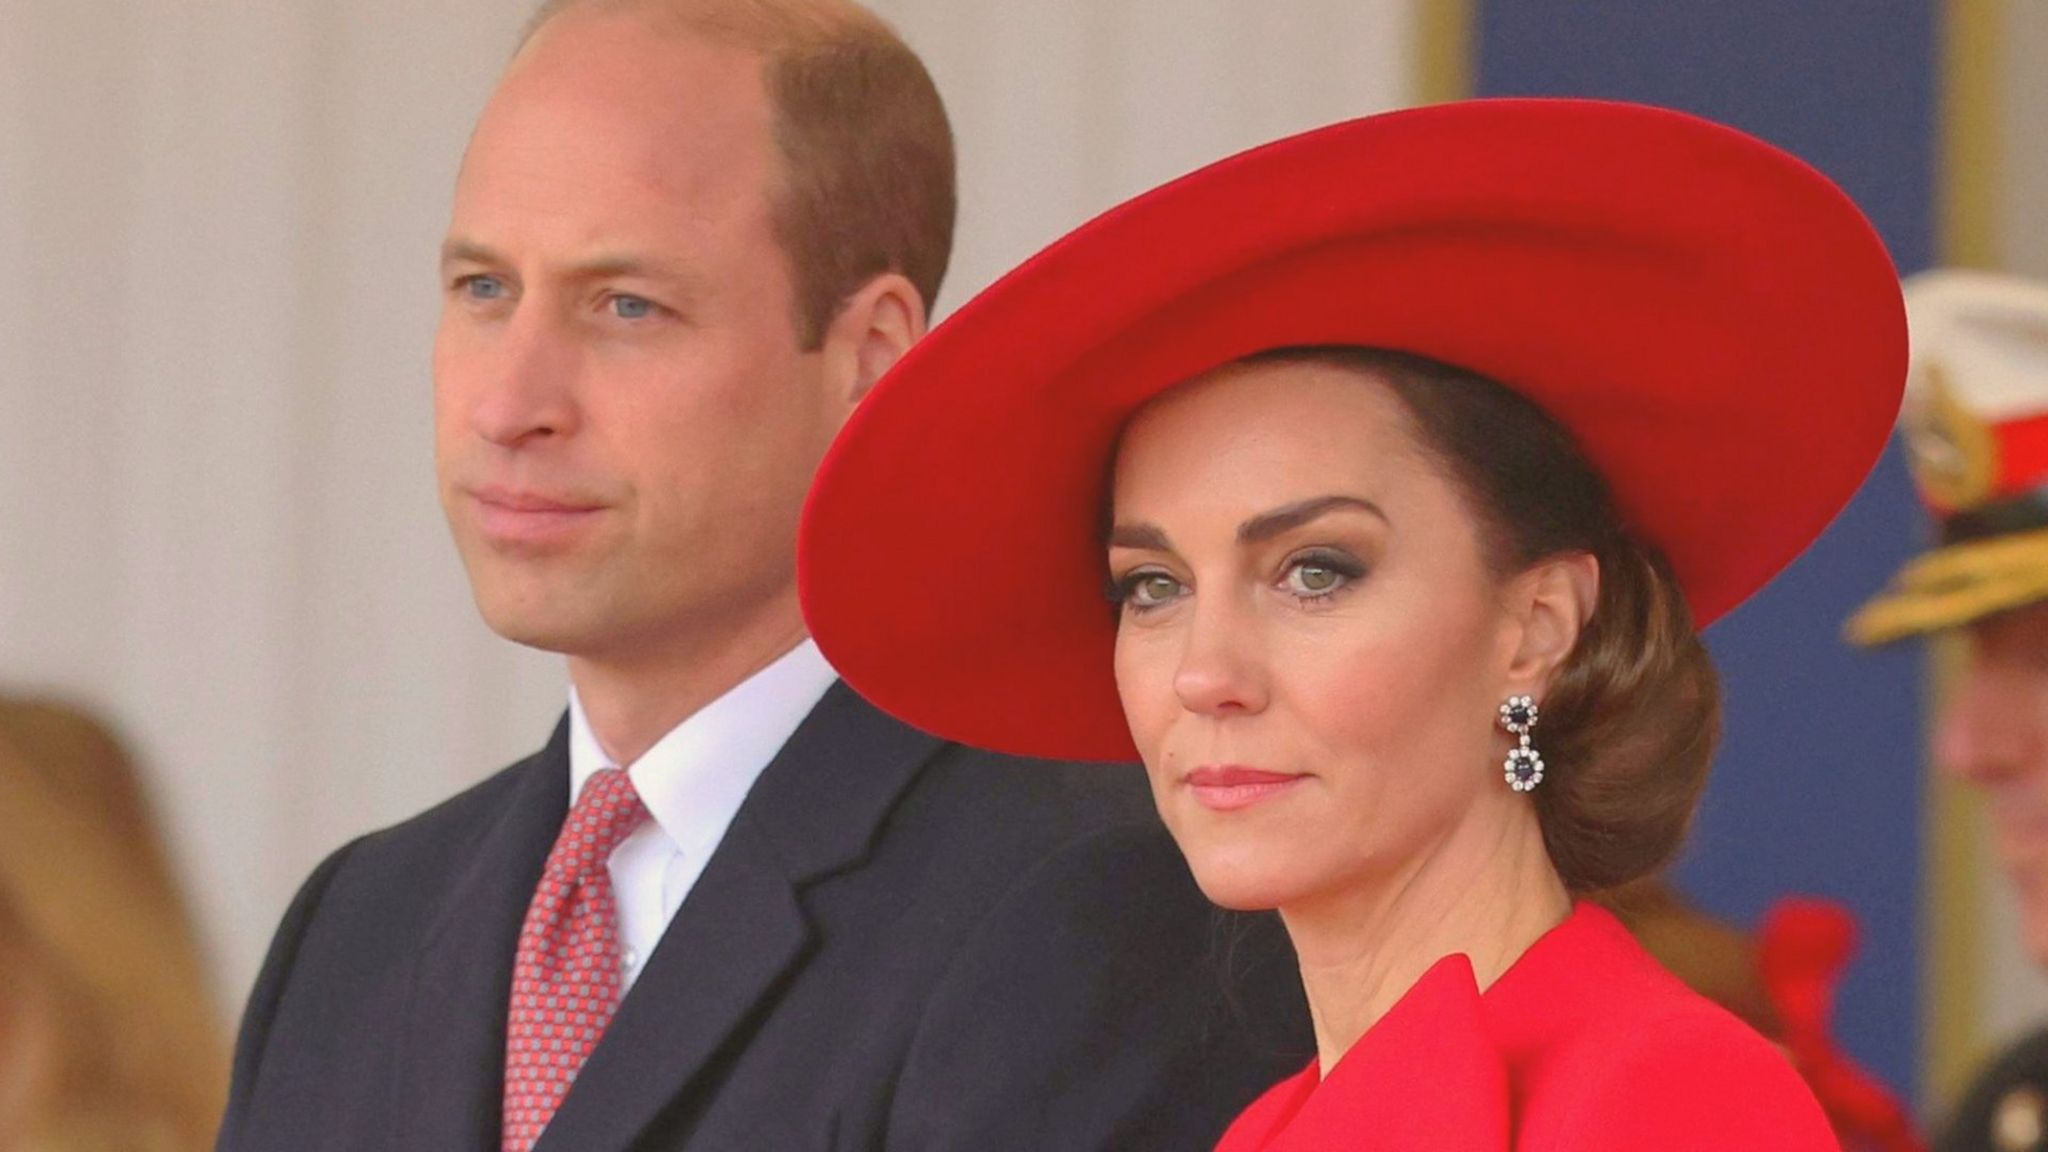 Prince William, Prince of Wales and Catherine, Princess of Wales, seen on 21 November 2023